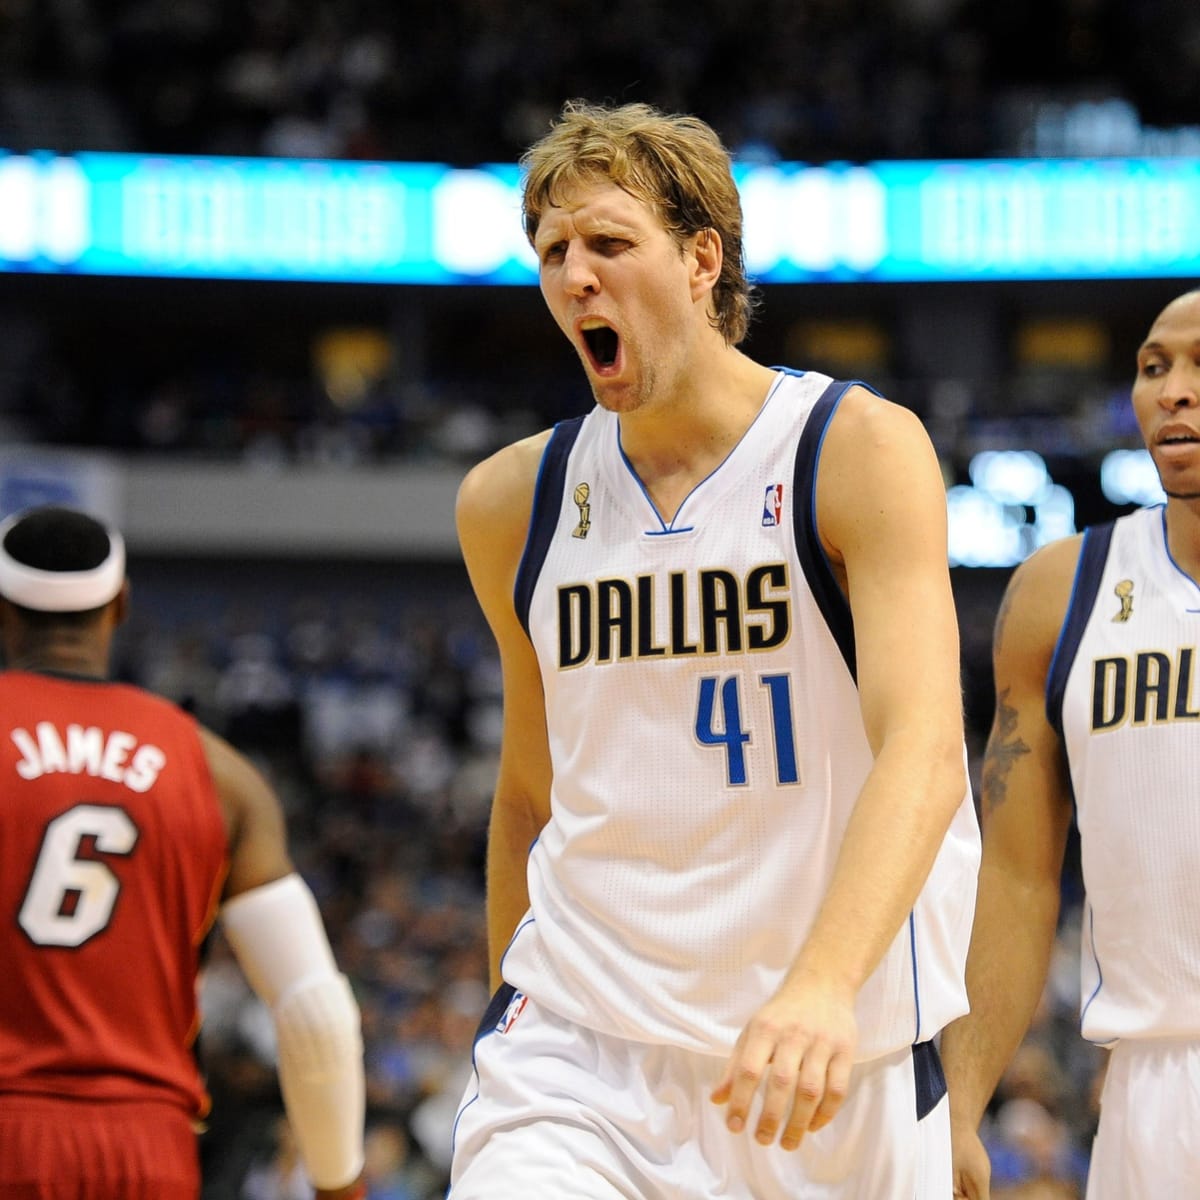 Mocked By Dwyane Wade, LeBron James In 2011 Finals, Dirk Nowitzki Responds - Illustrated Dallas Mavericks News, Analysis and More